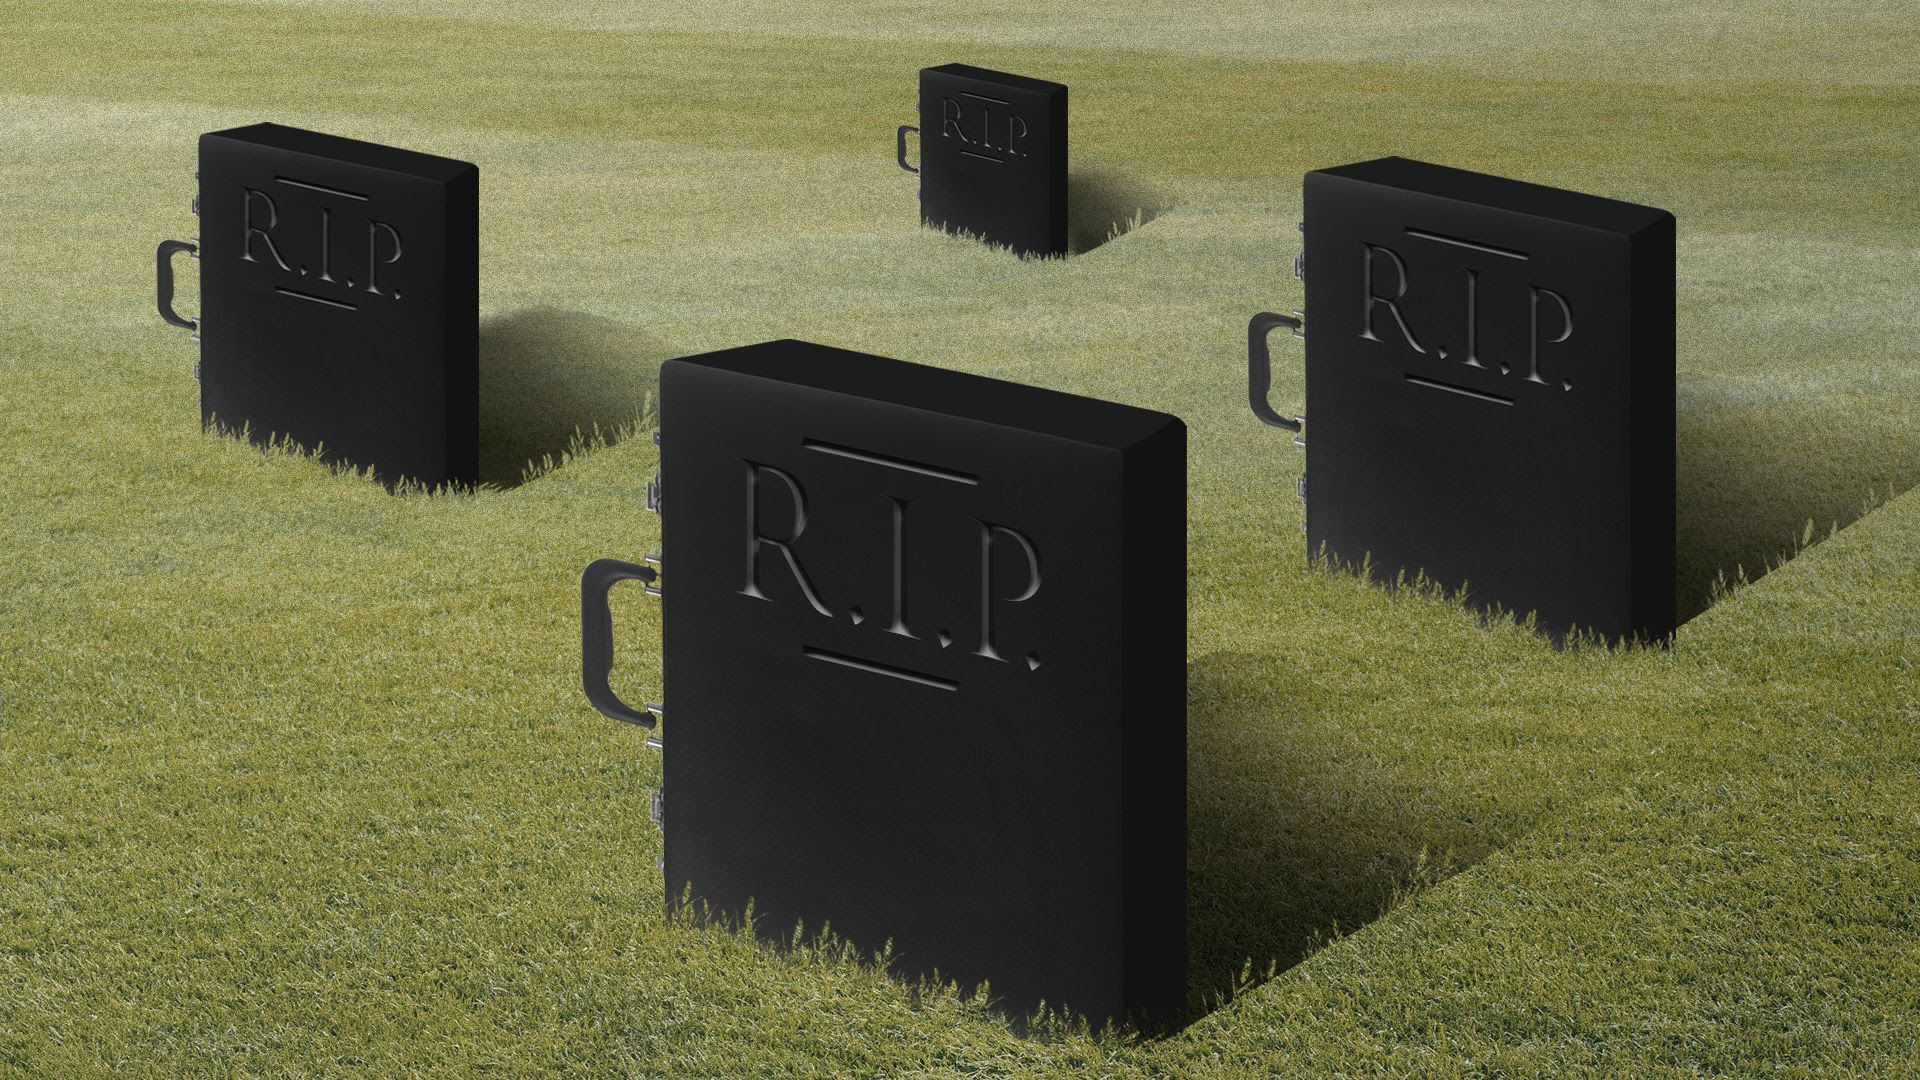 illustration of suitcases positioned like headstones in a graveyard